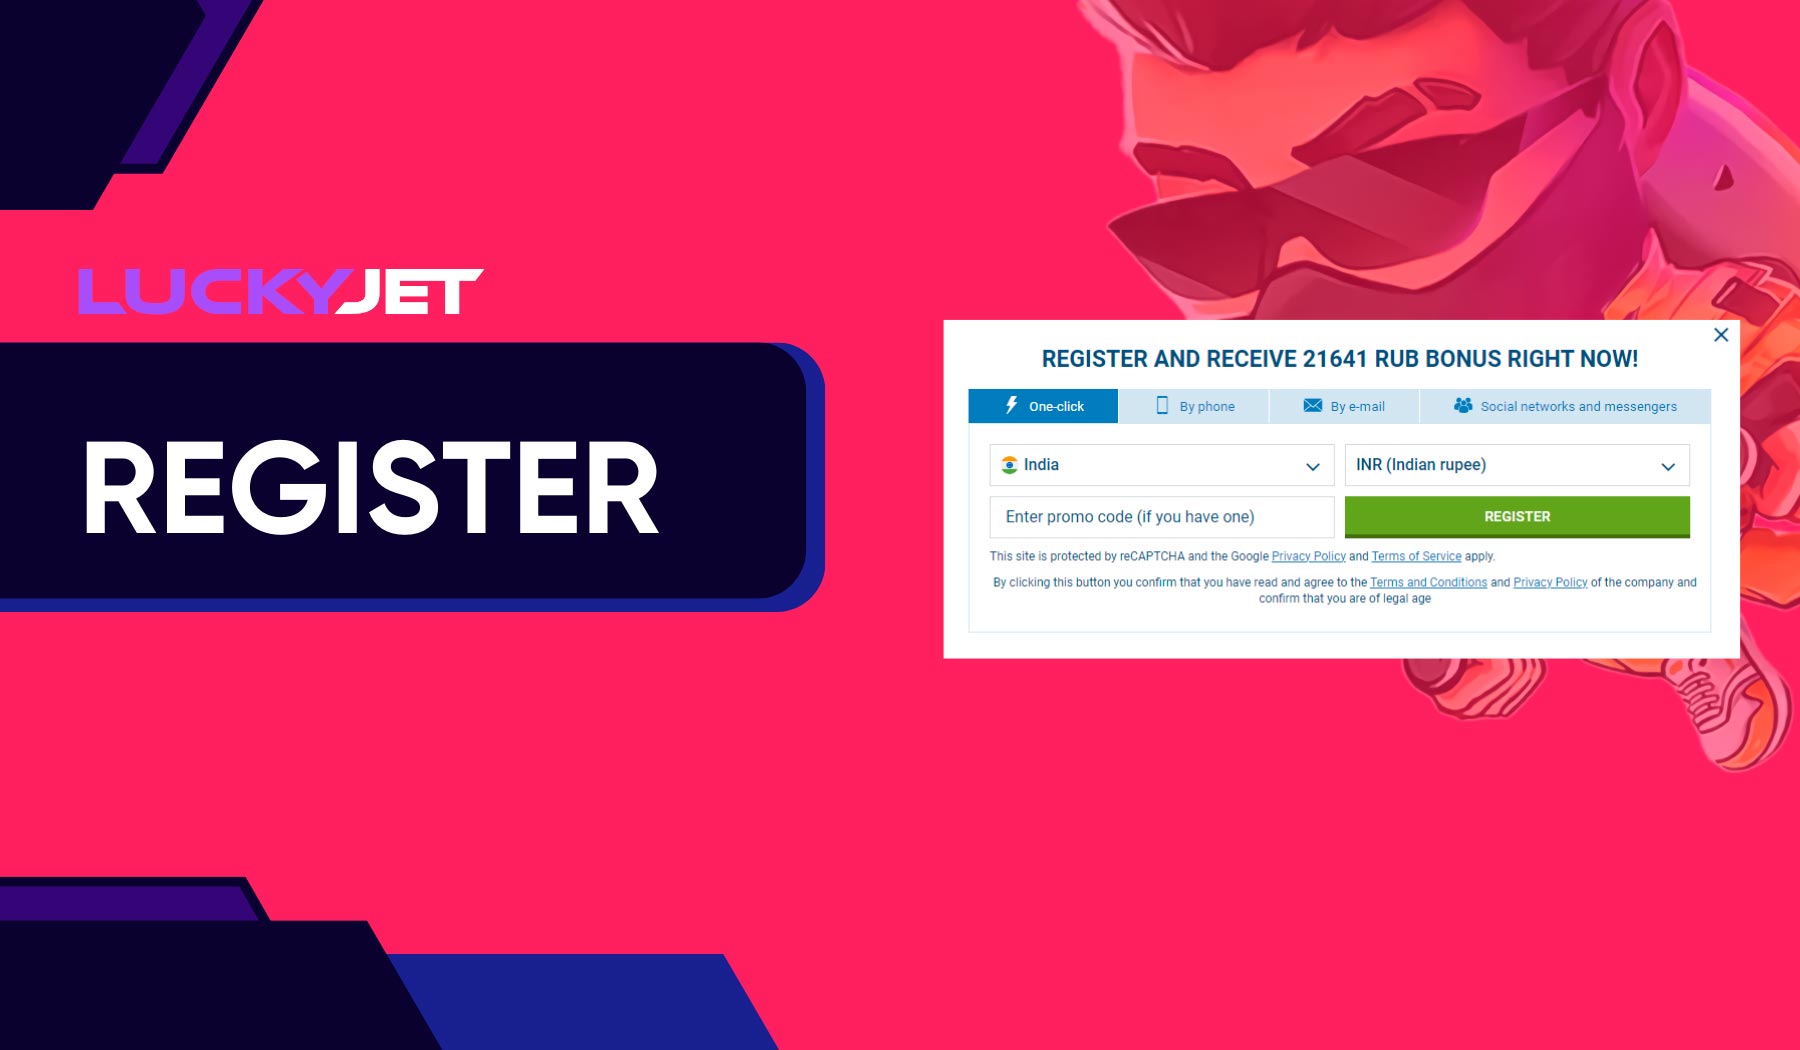 To start playing Lucky Jet you need to register on the 1xbet platform